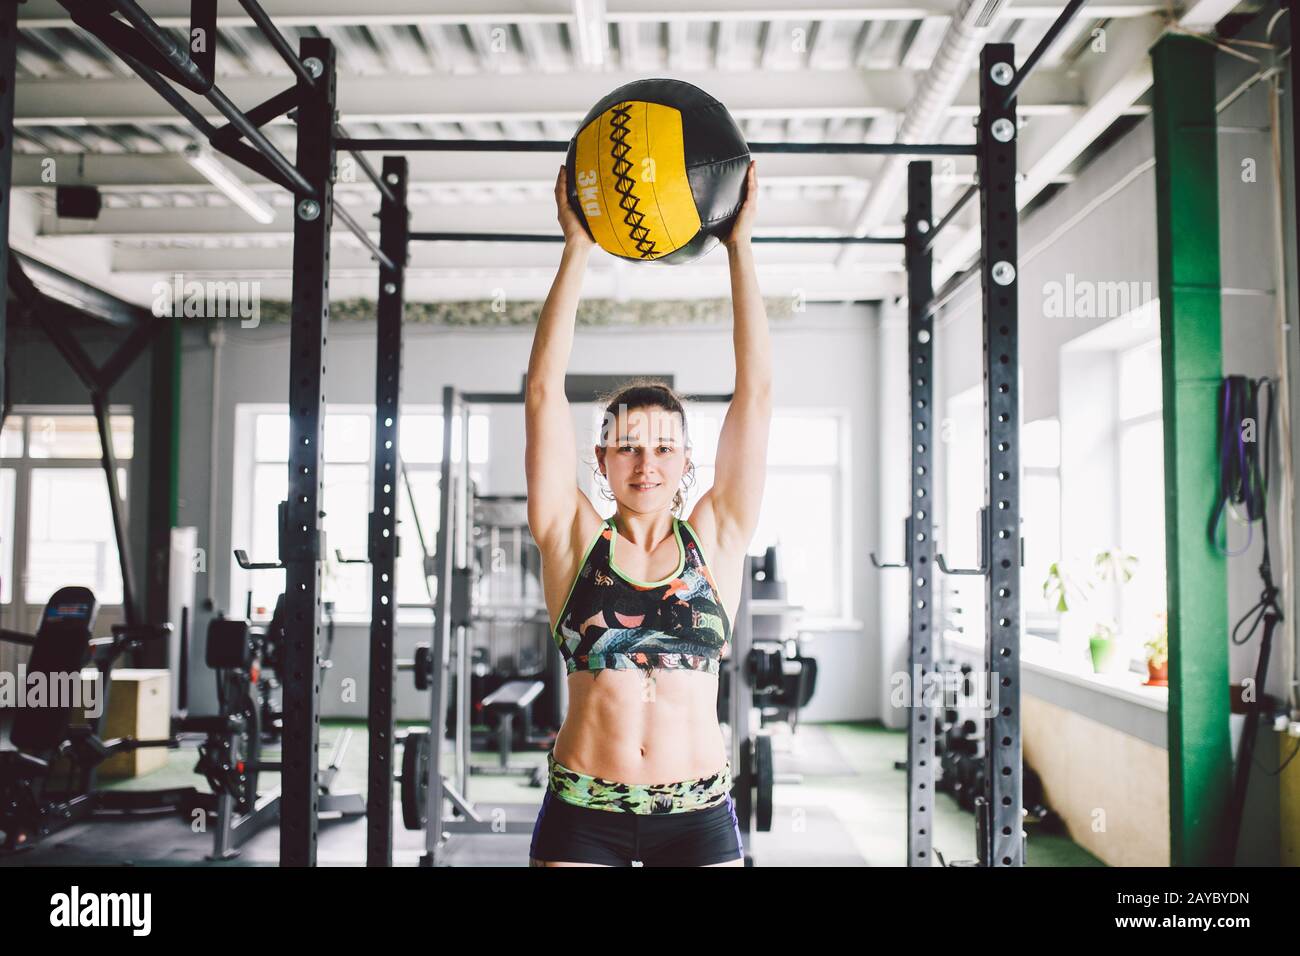 beautiful caucasian girl holding a ball in the gym. Dressed in top and shorts Stock Photo